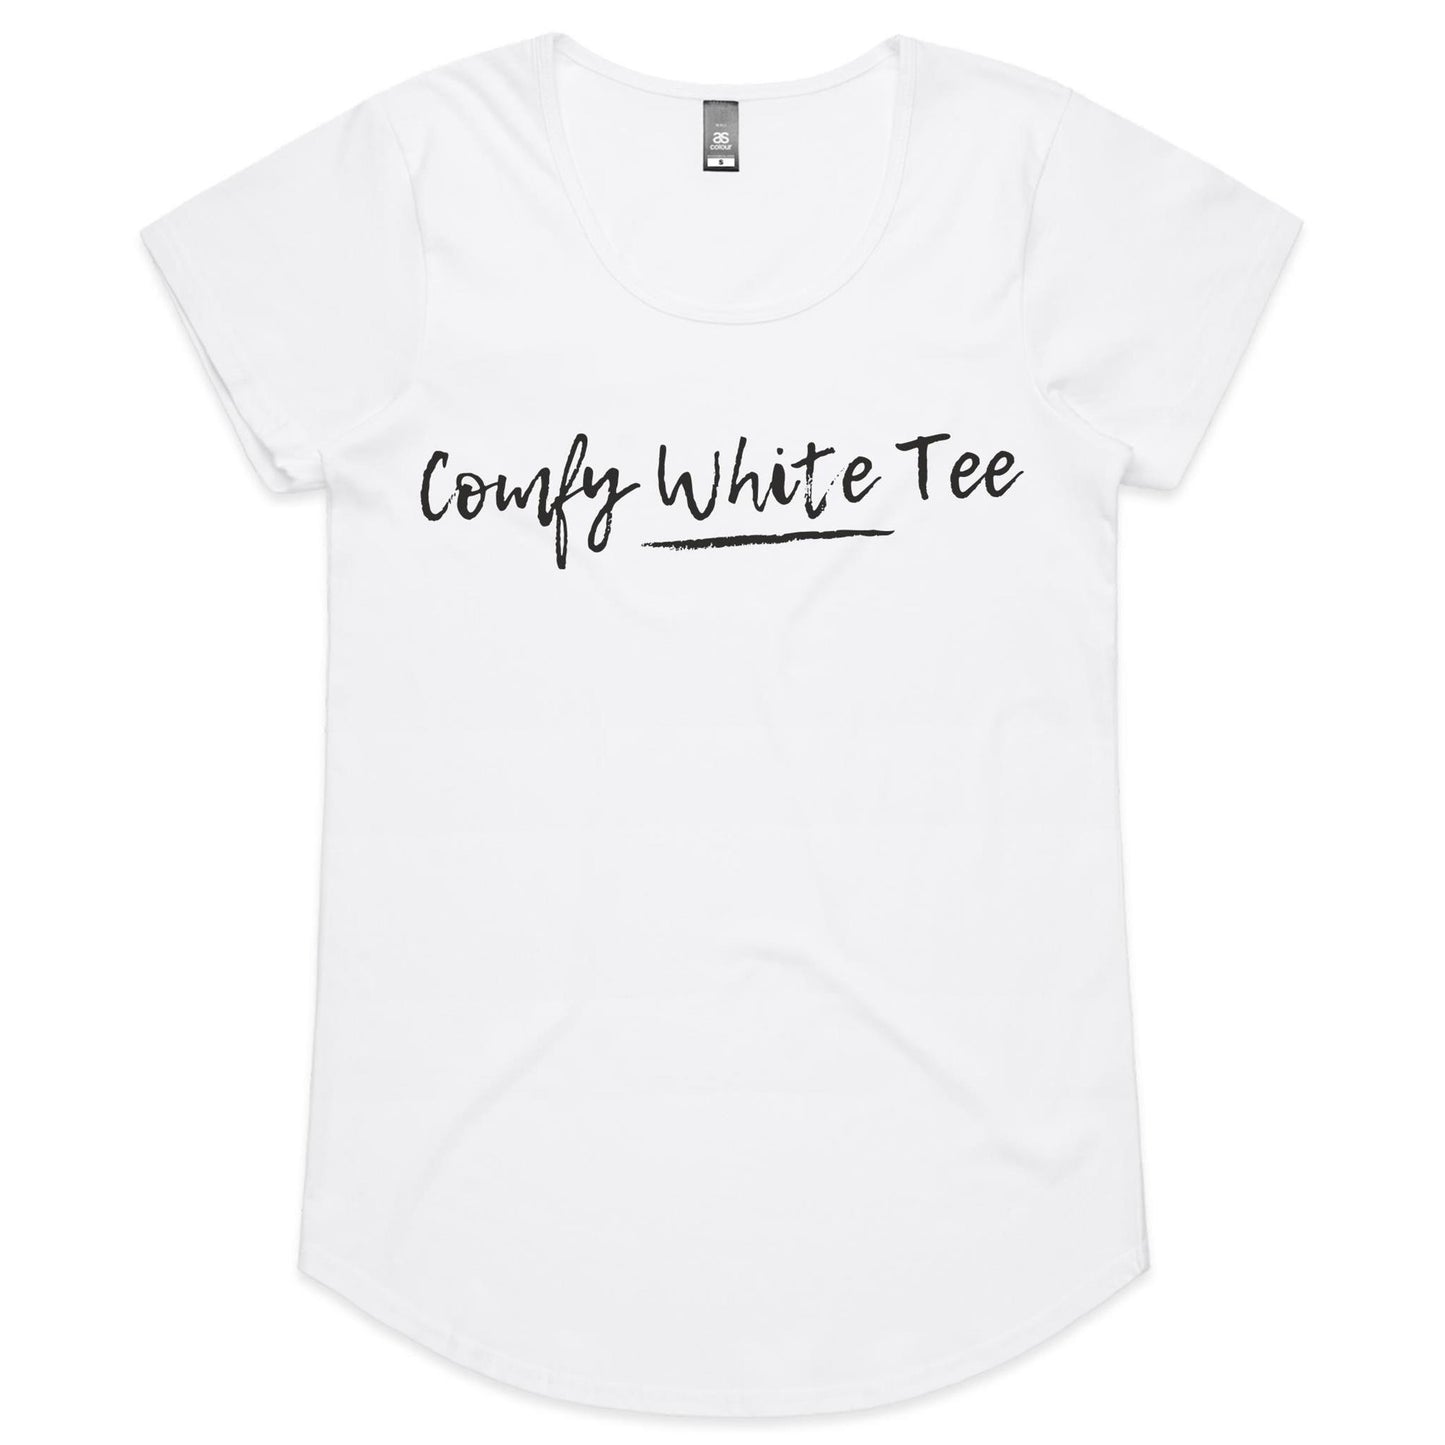 Comfy White Tee - Womens Scoop Neck T-Shirt White Womens Scoop Neck T-shirt Funny